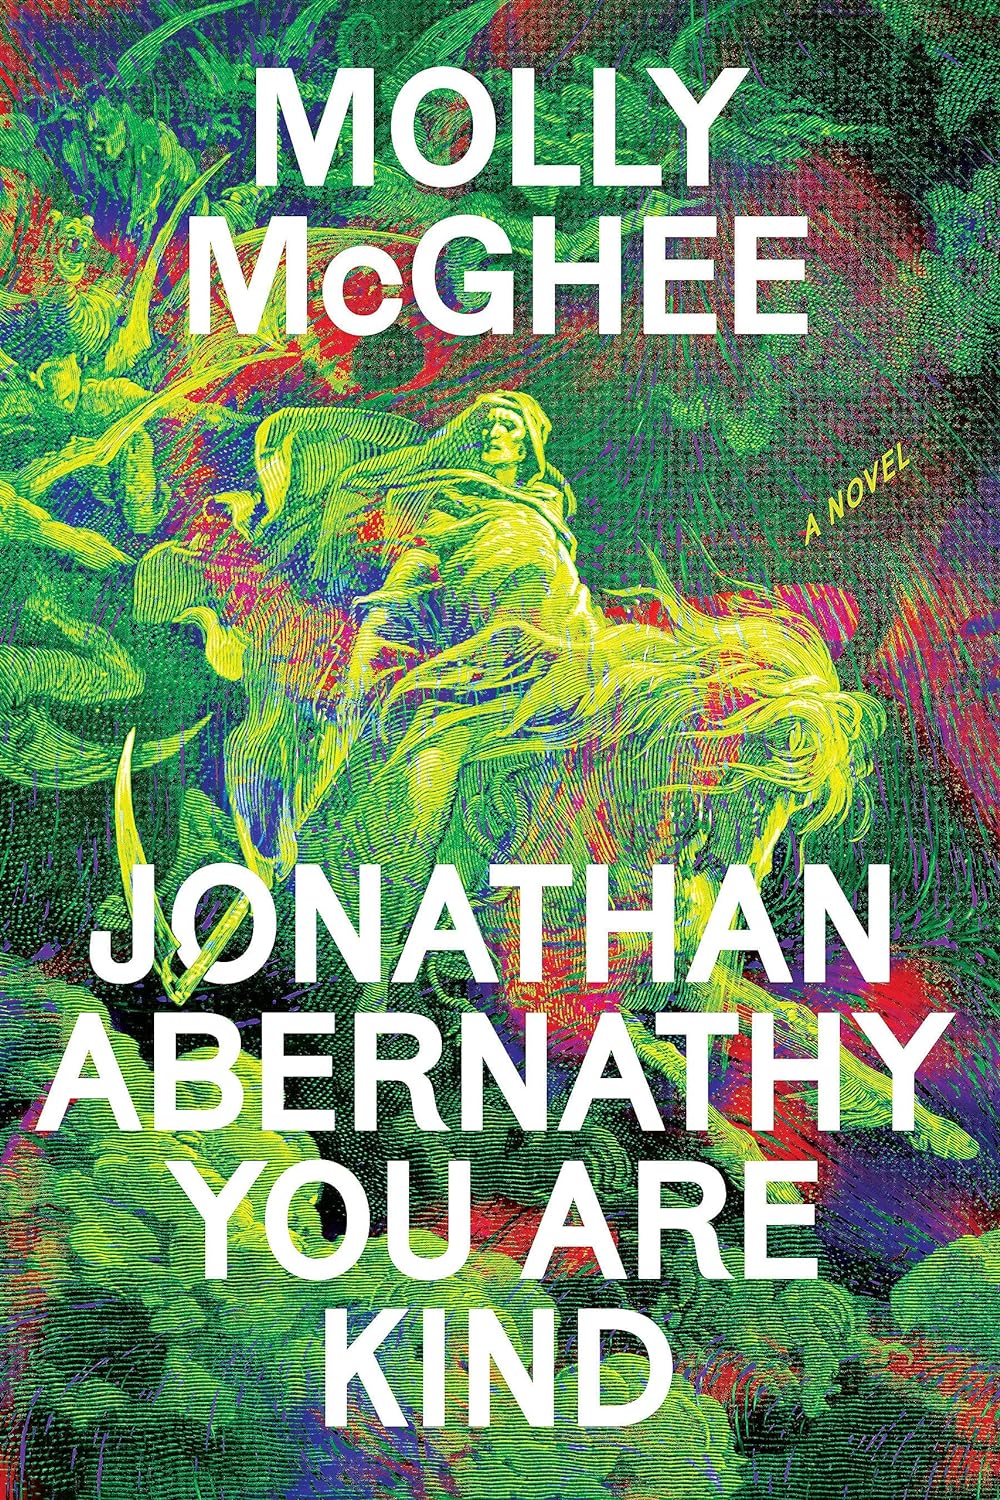 Molly McGhee, <a href="https://bookshop.org/a/132/9781662602115" target="_blank" rel="noopener"><em>Jonathan Abernathy You Are Kind</em></a>; cover design by Alicia Tatone (Astra House, October 17) 